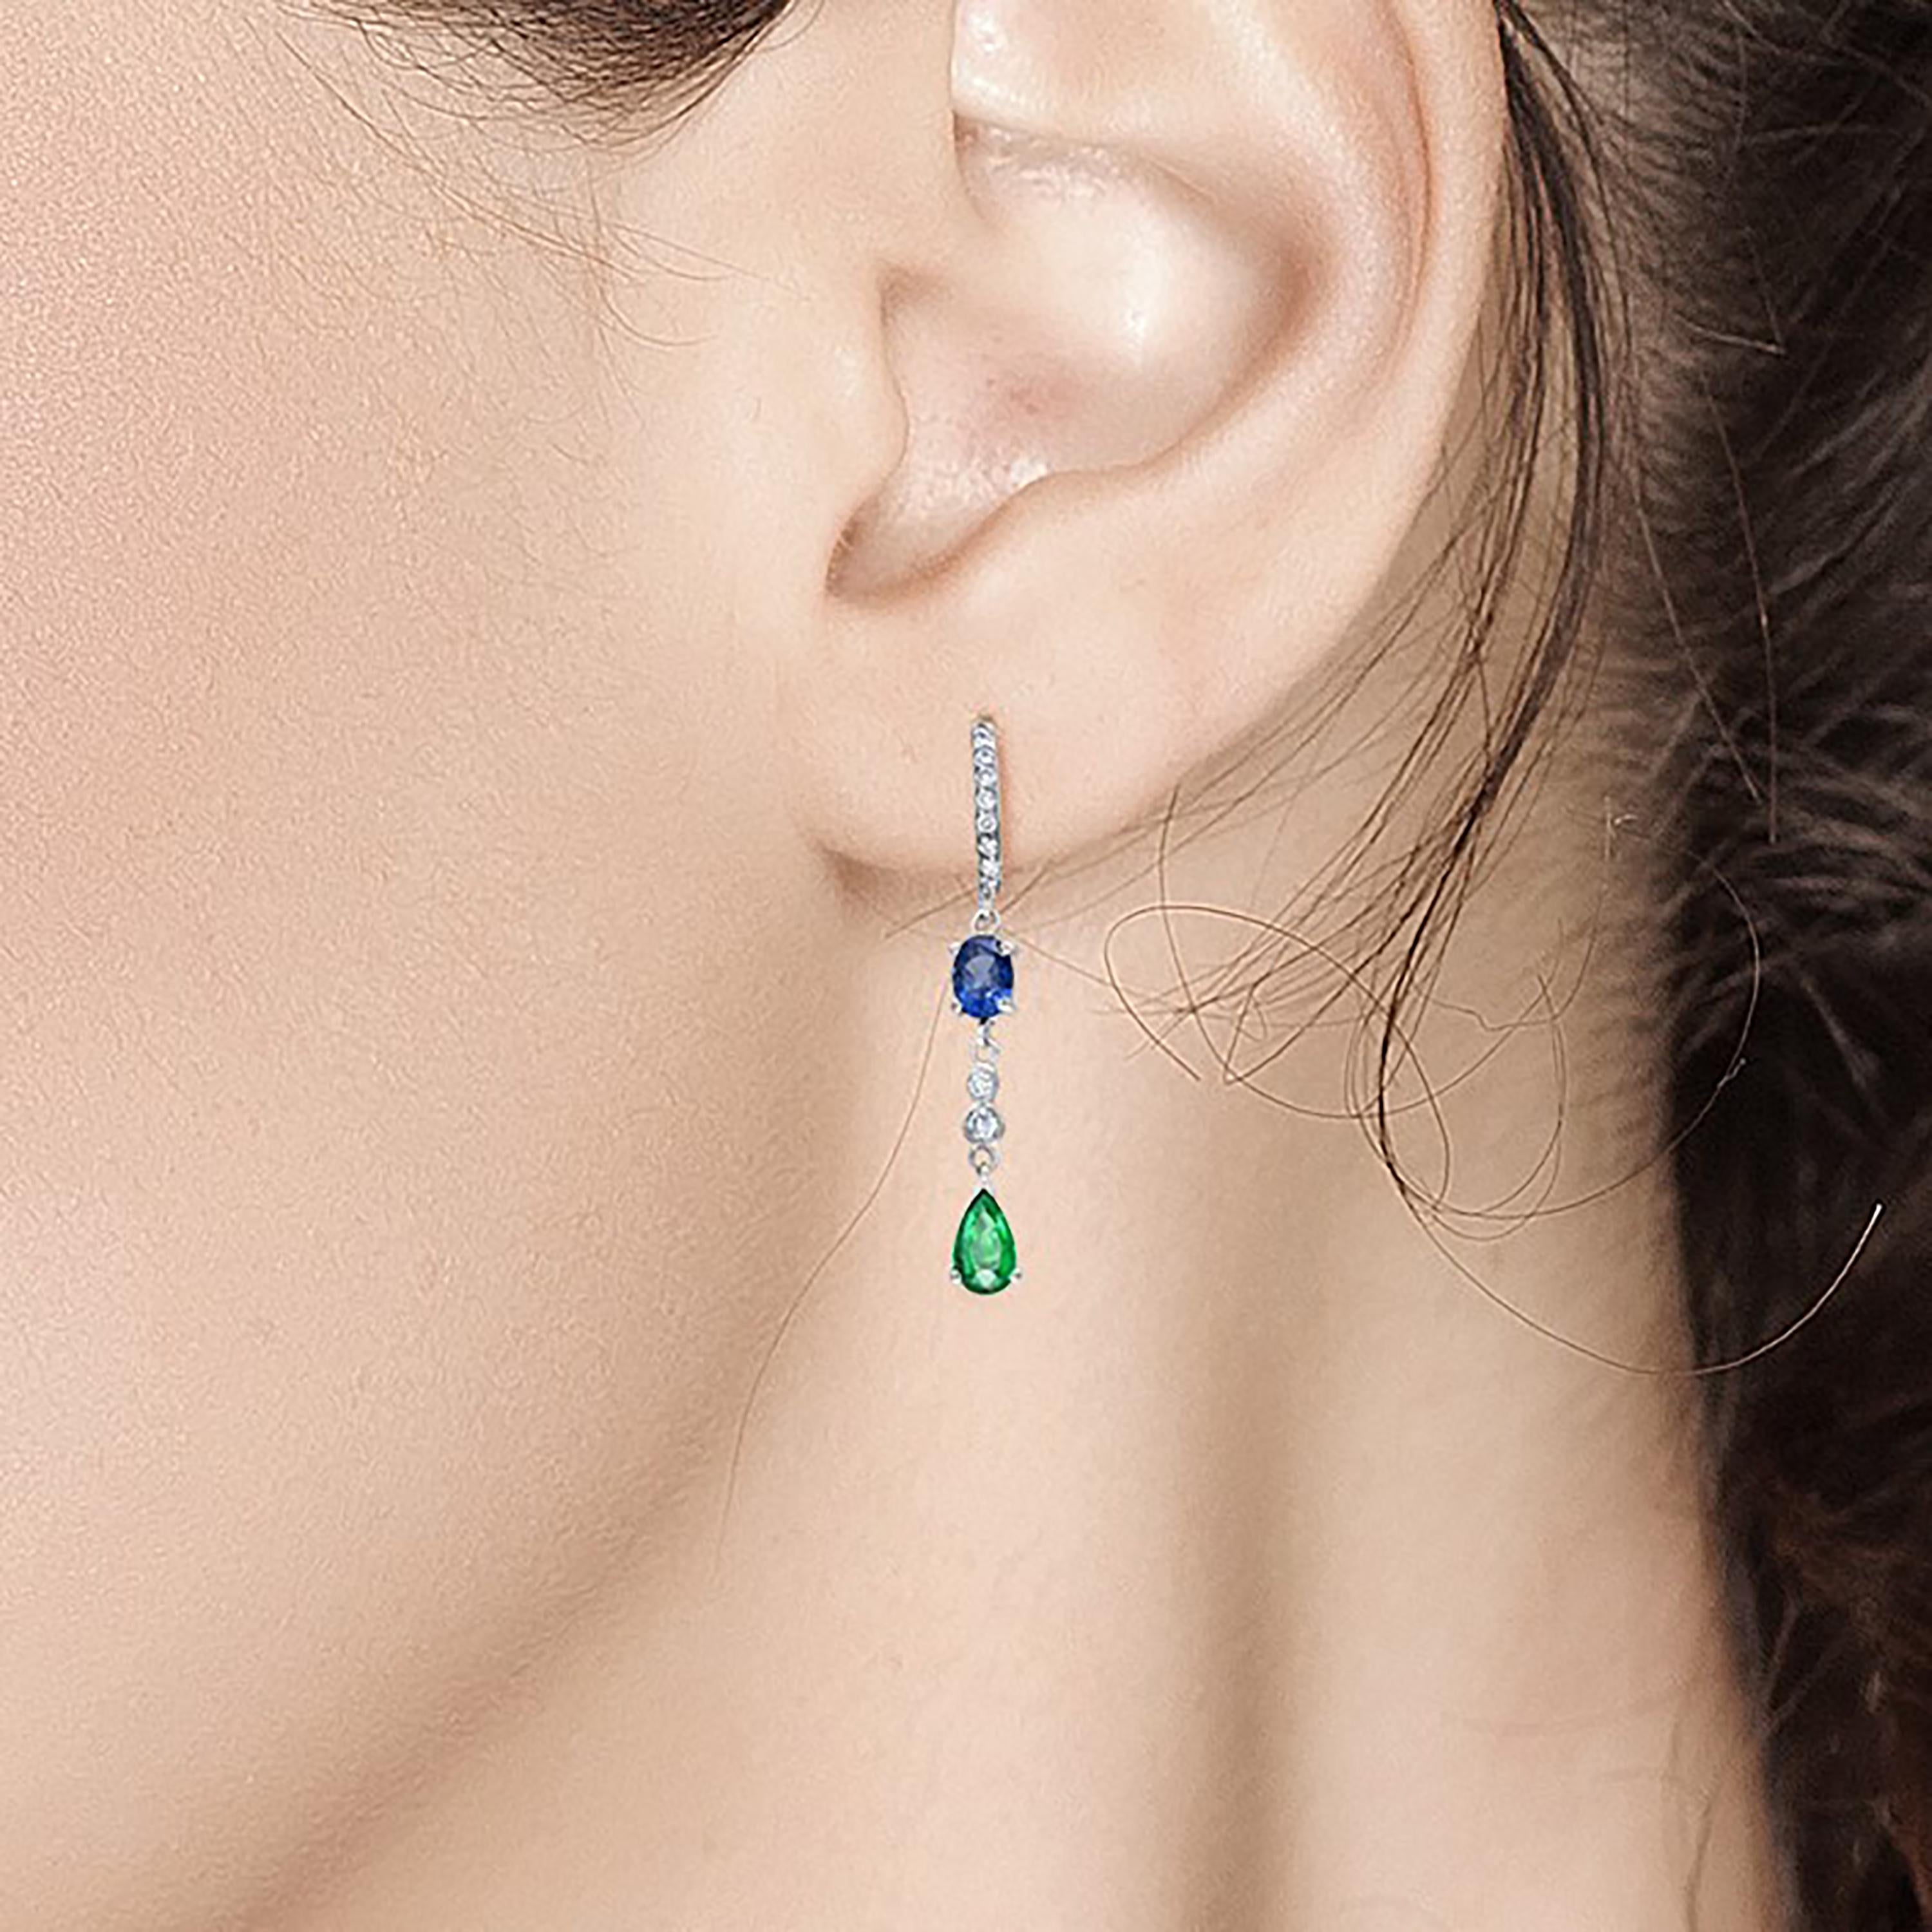 Fourteen karats white gold diamond hoop earrings 
Matched and mirrored emerald and sapphires in a shoulder dusty pendant earrings 
Pear Shape and oval shape Sapphire weighing 1.20 carat 
Pear shape and oval emerald weighing 1.00 carat
Diamond hoops